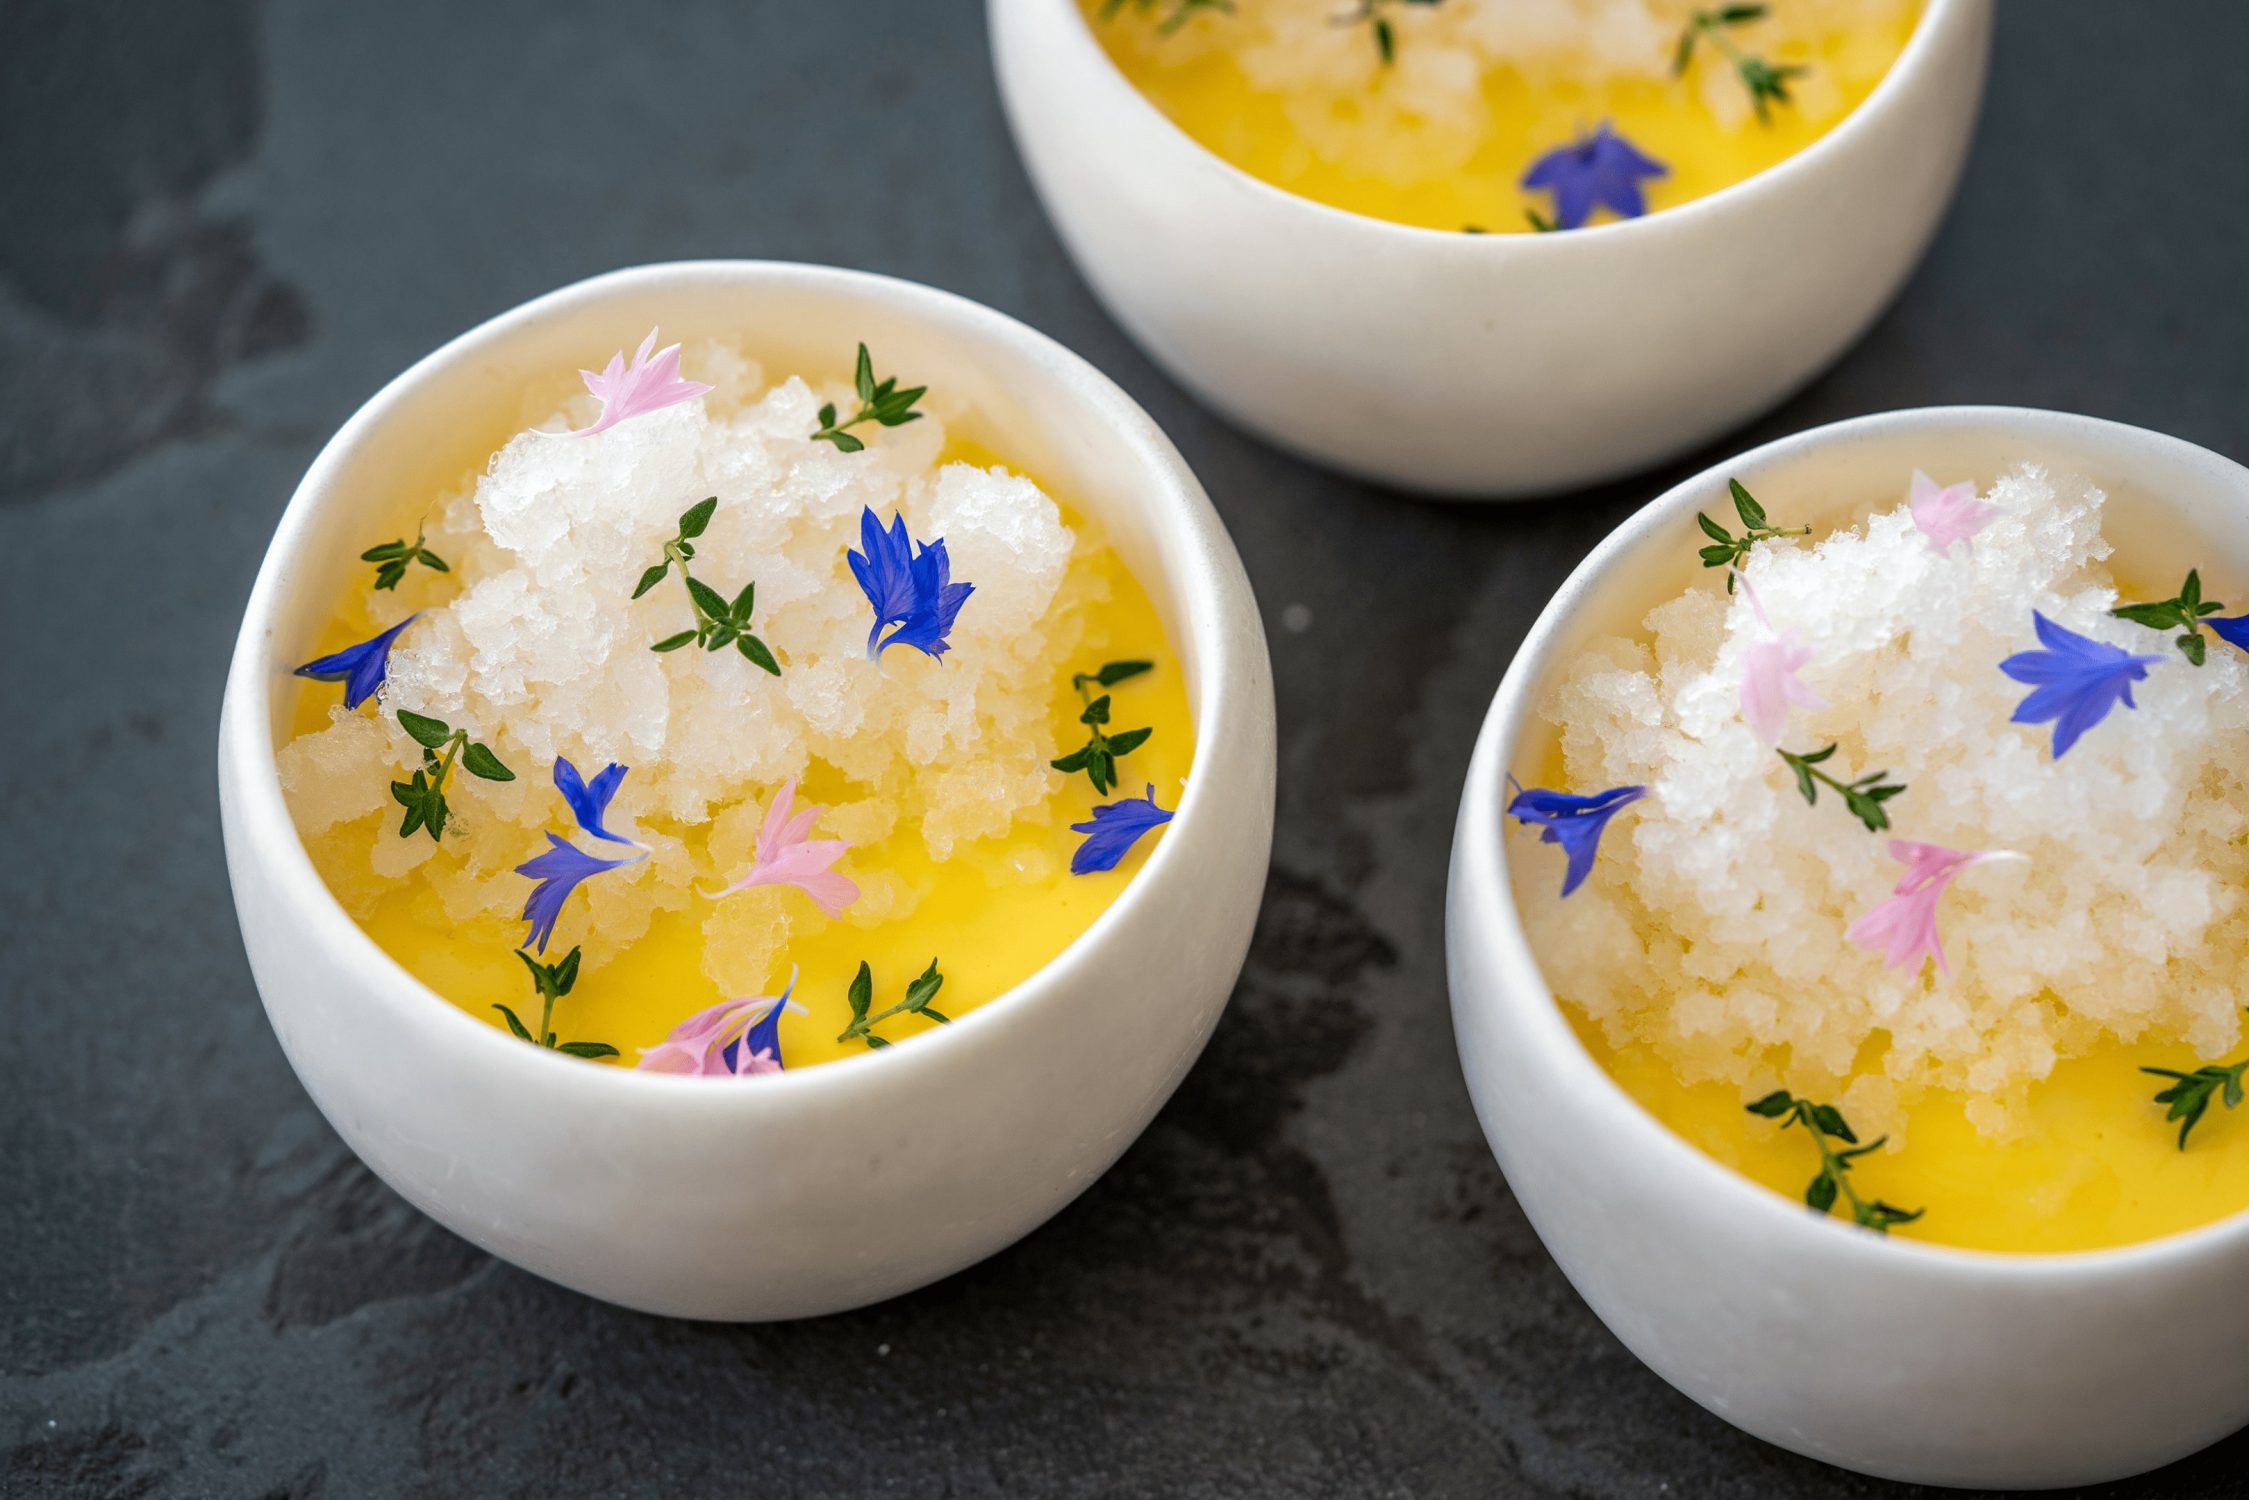 yellow panna cotta with edible flowers